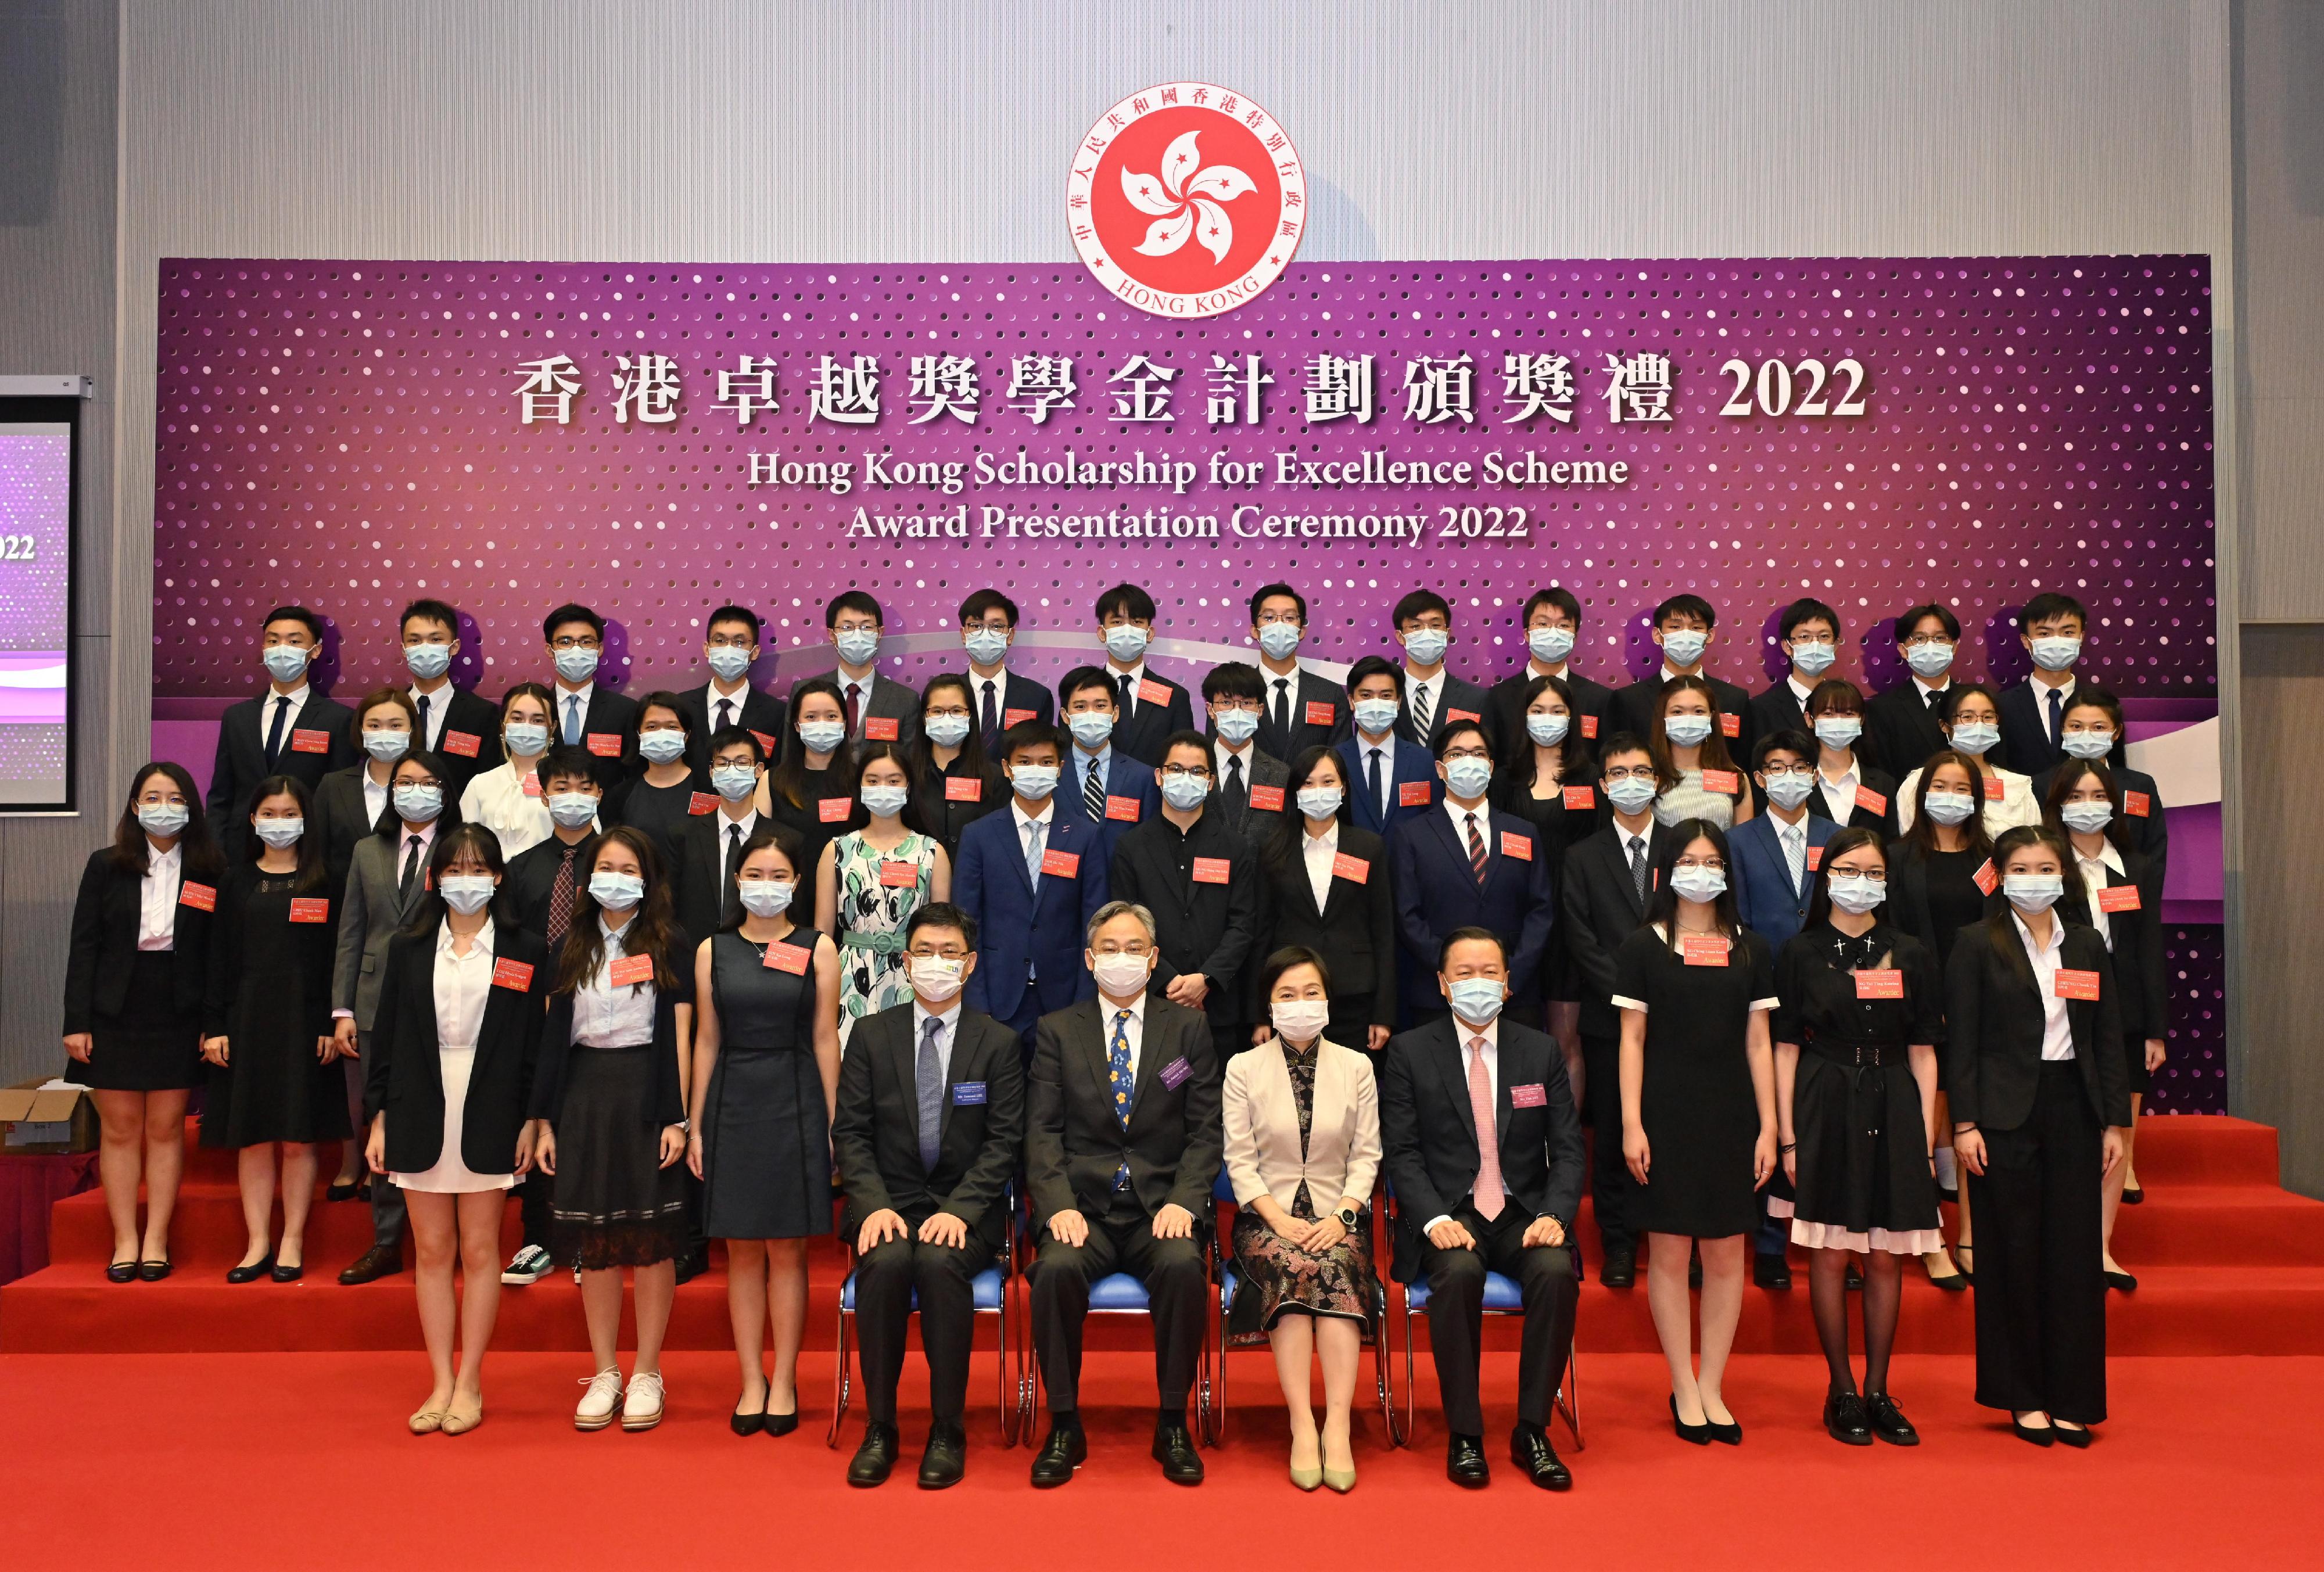 The Secretary for Education, Dr Choi Yuk-lin (first row, second right) is pictured with the awardees at the Award Presentation Ceremony 2022 of the Hong Kong Scholarship for Excellence Scheme today (August 24).